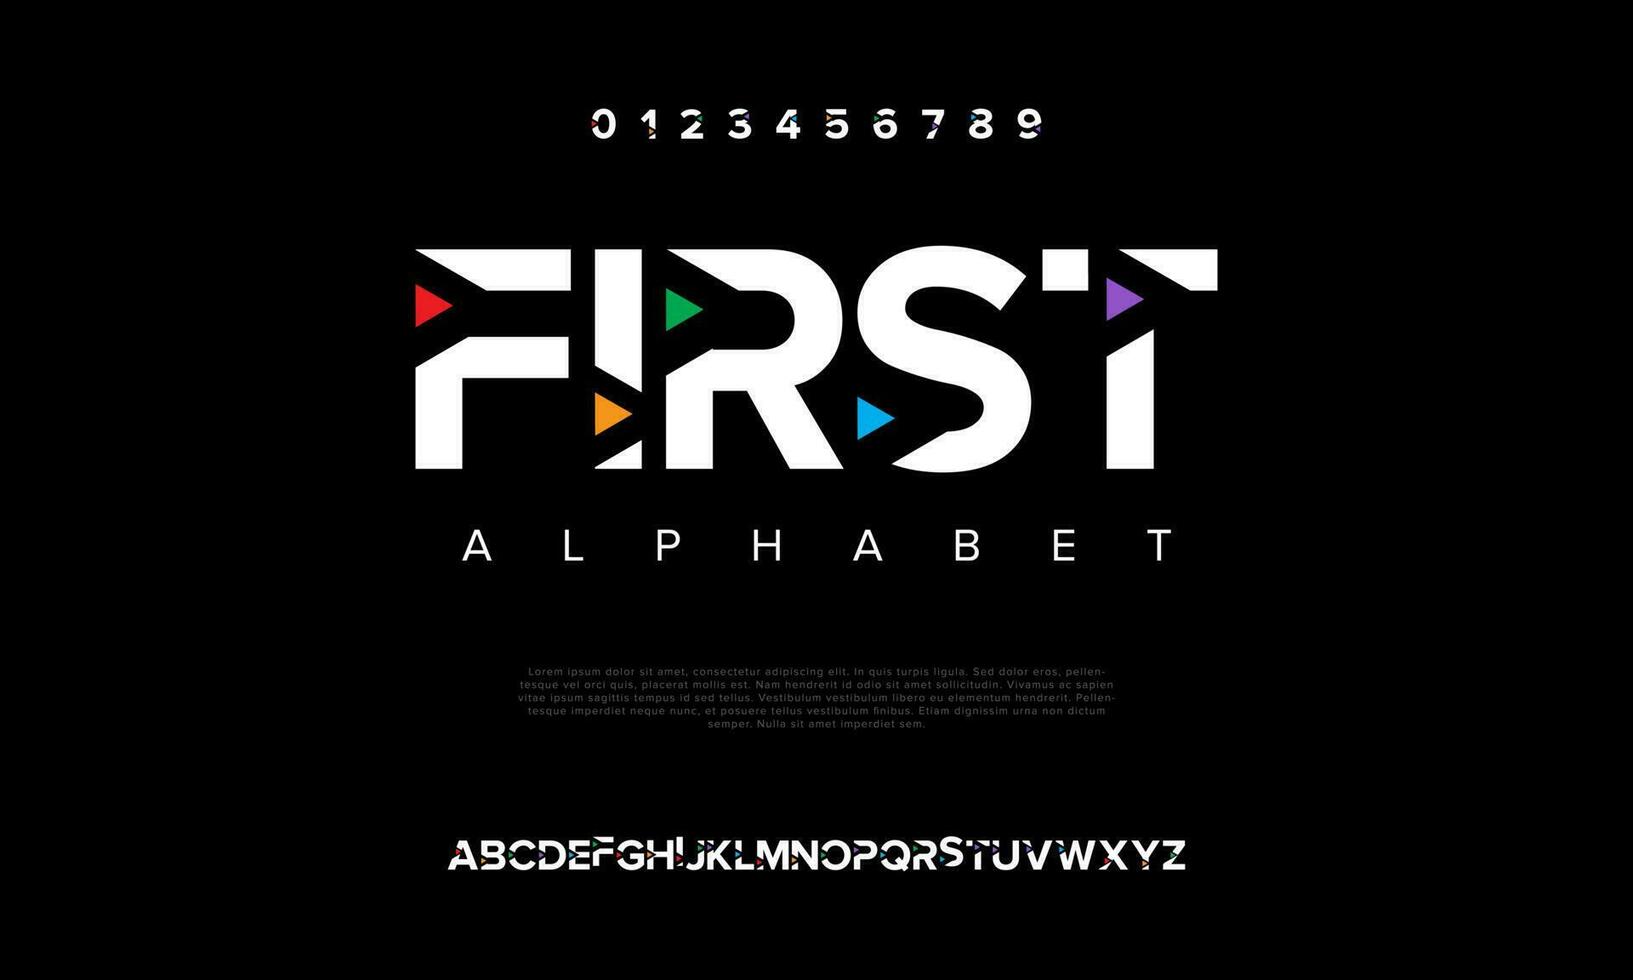 First abstract digital technology logo font alphabet. Minimal modern urban fonts for logo, brand etc. Typography typeface uppercase lowercase and number. vector illustration